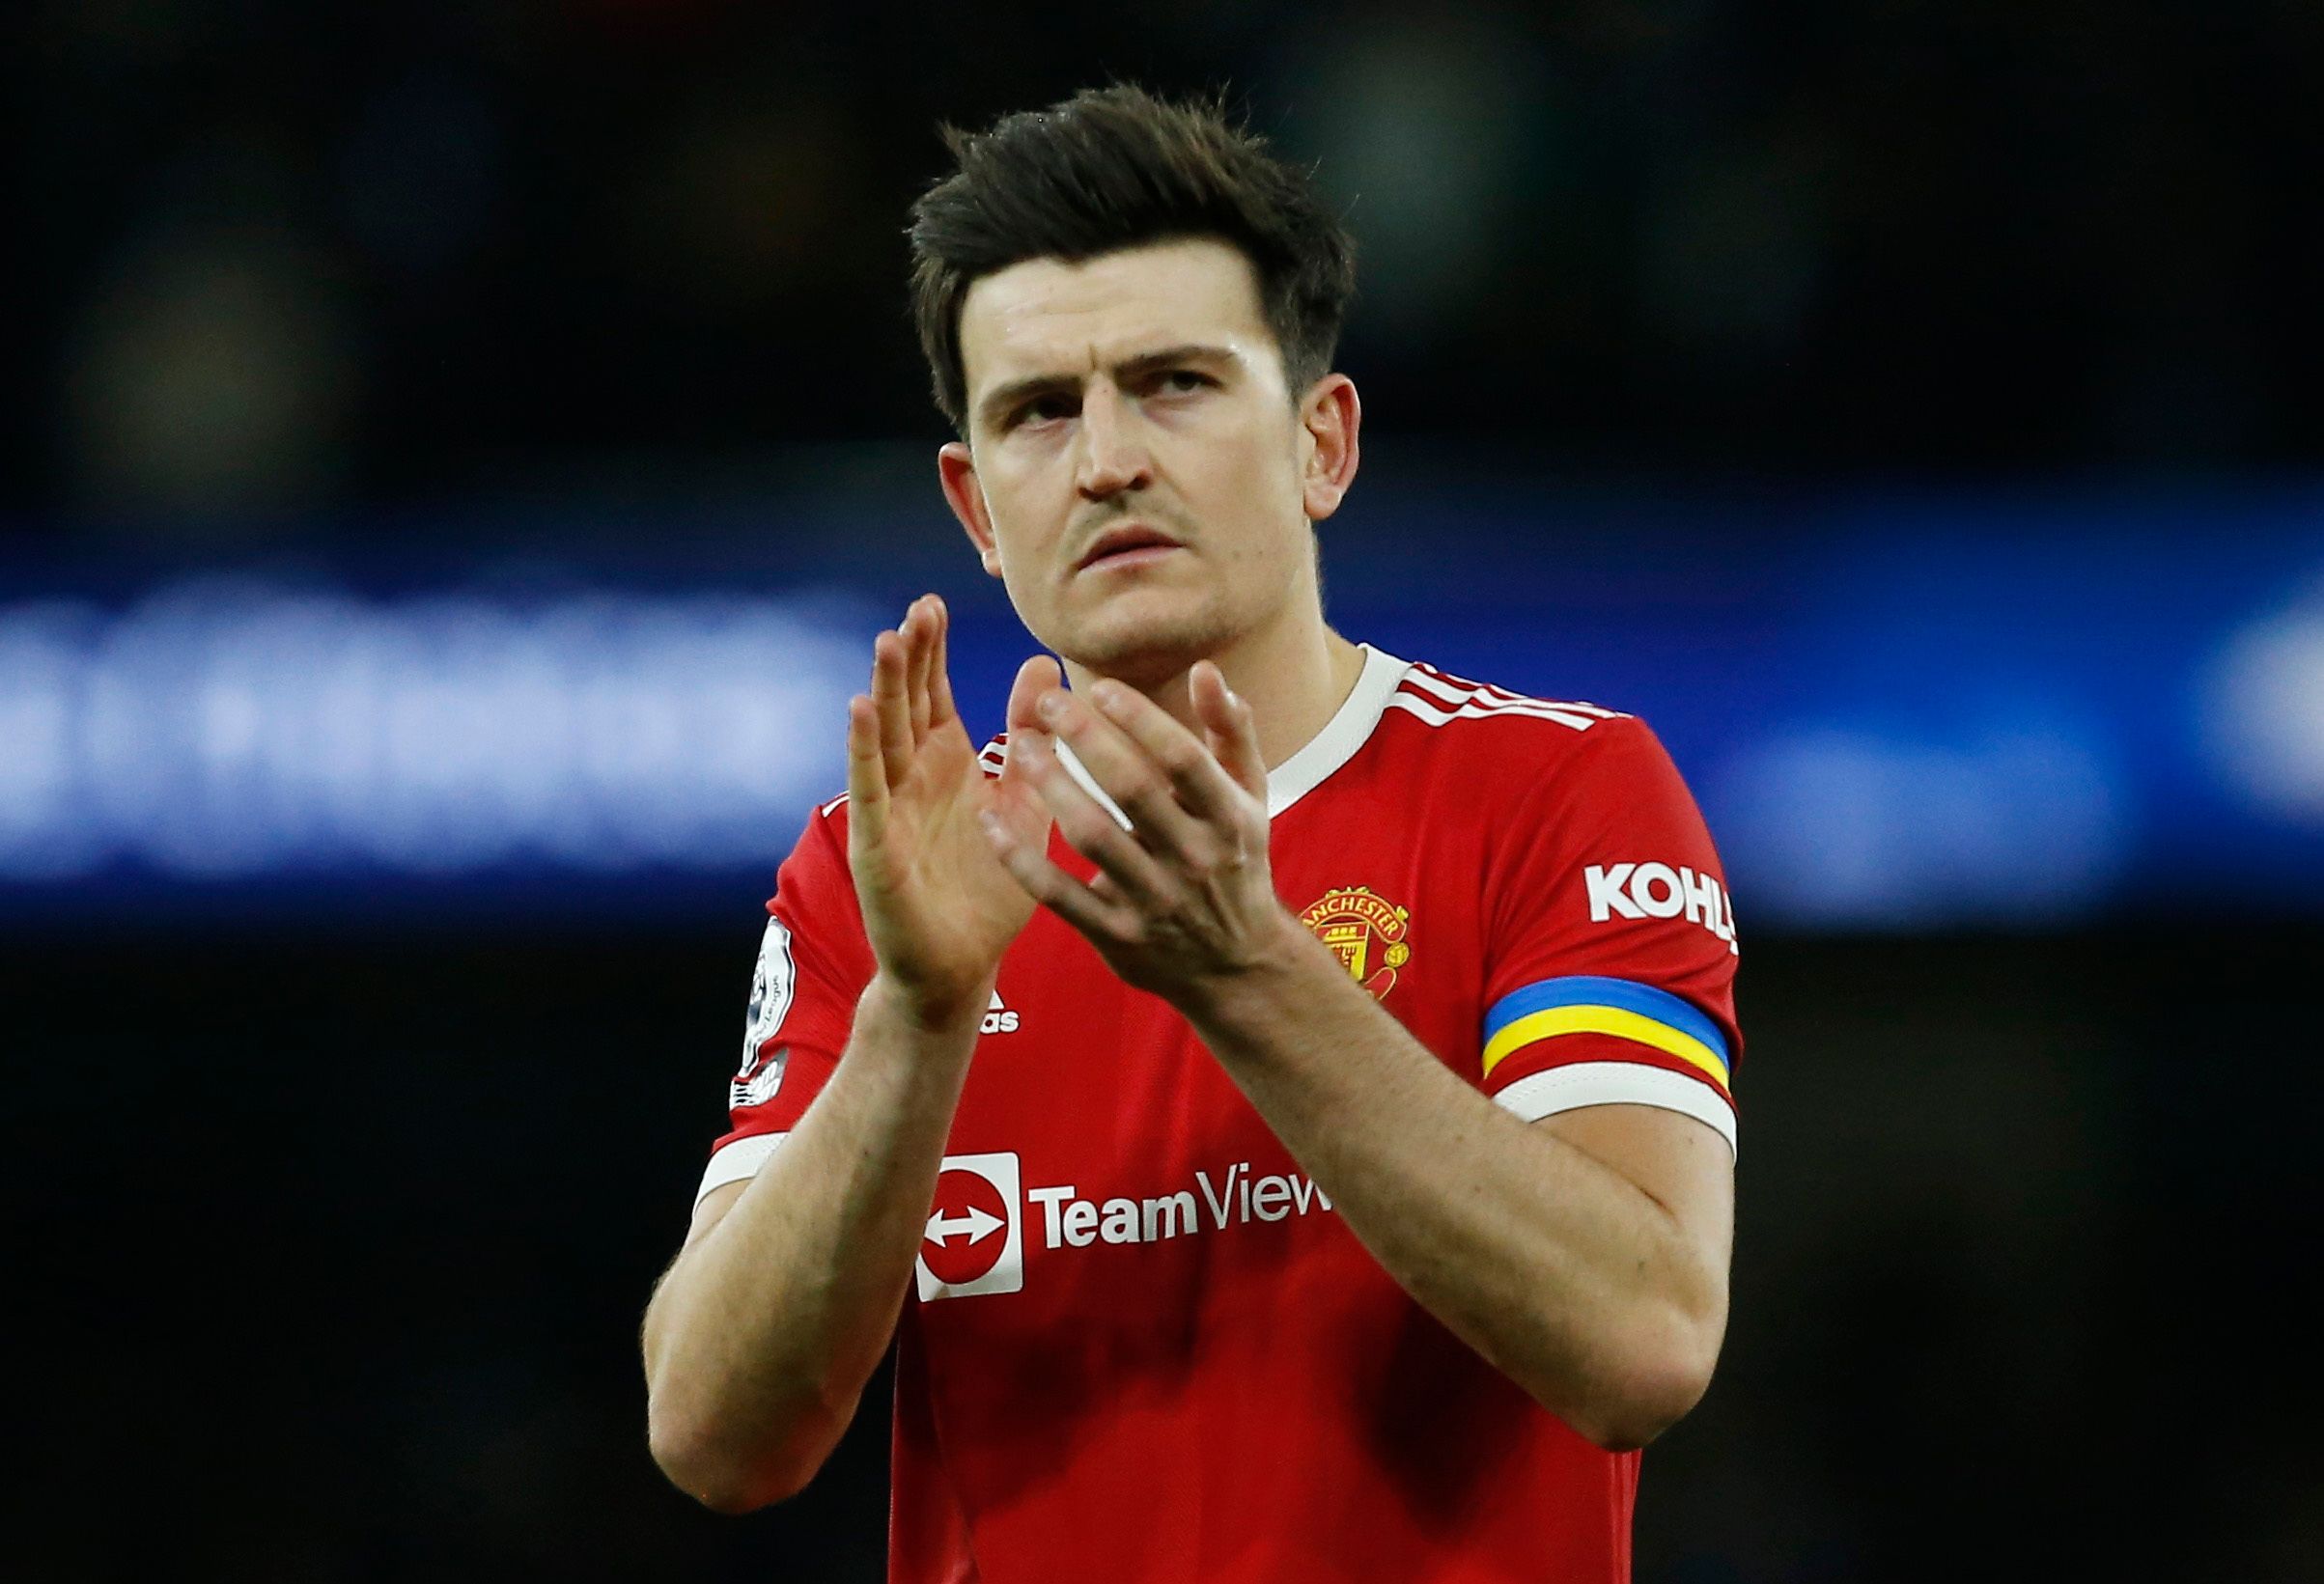 Man Utd's Maguire clapping.